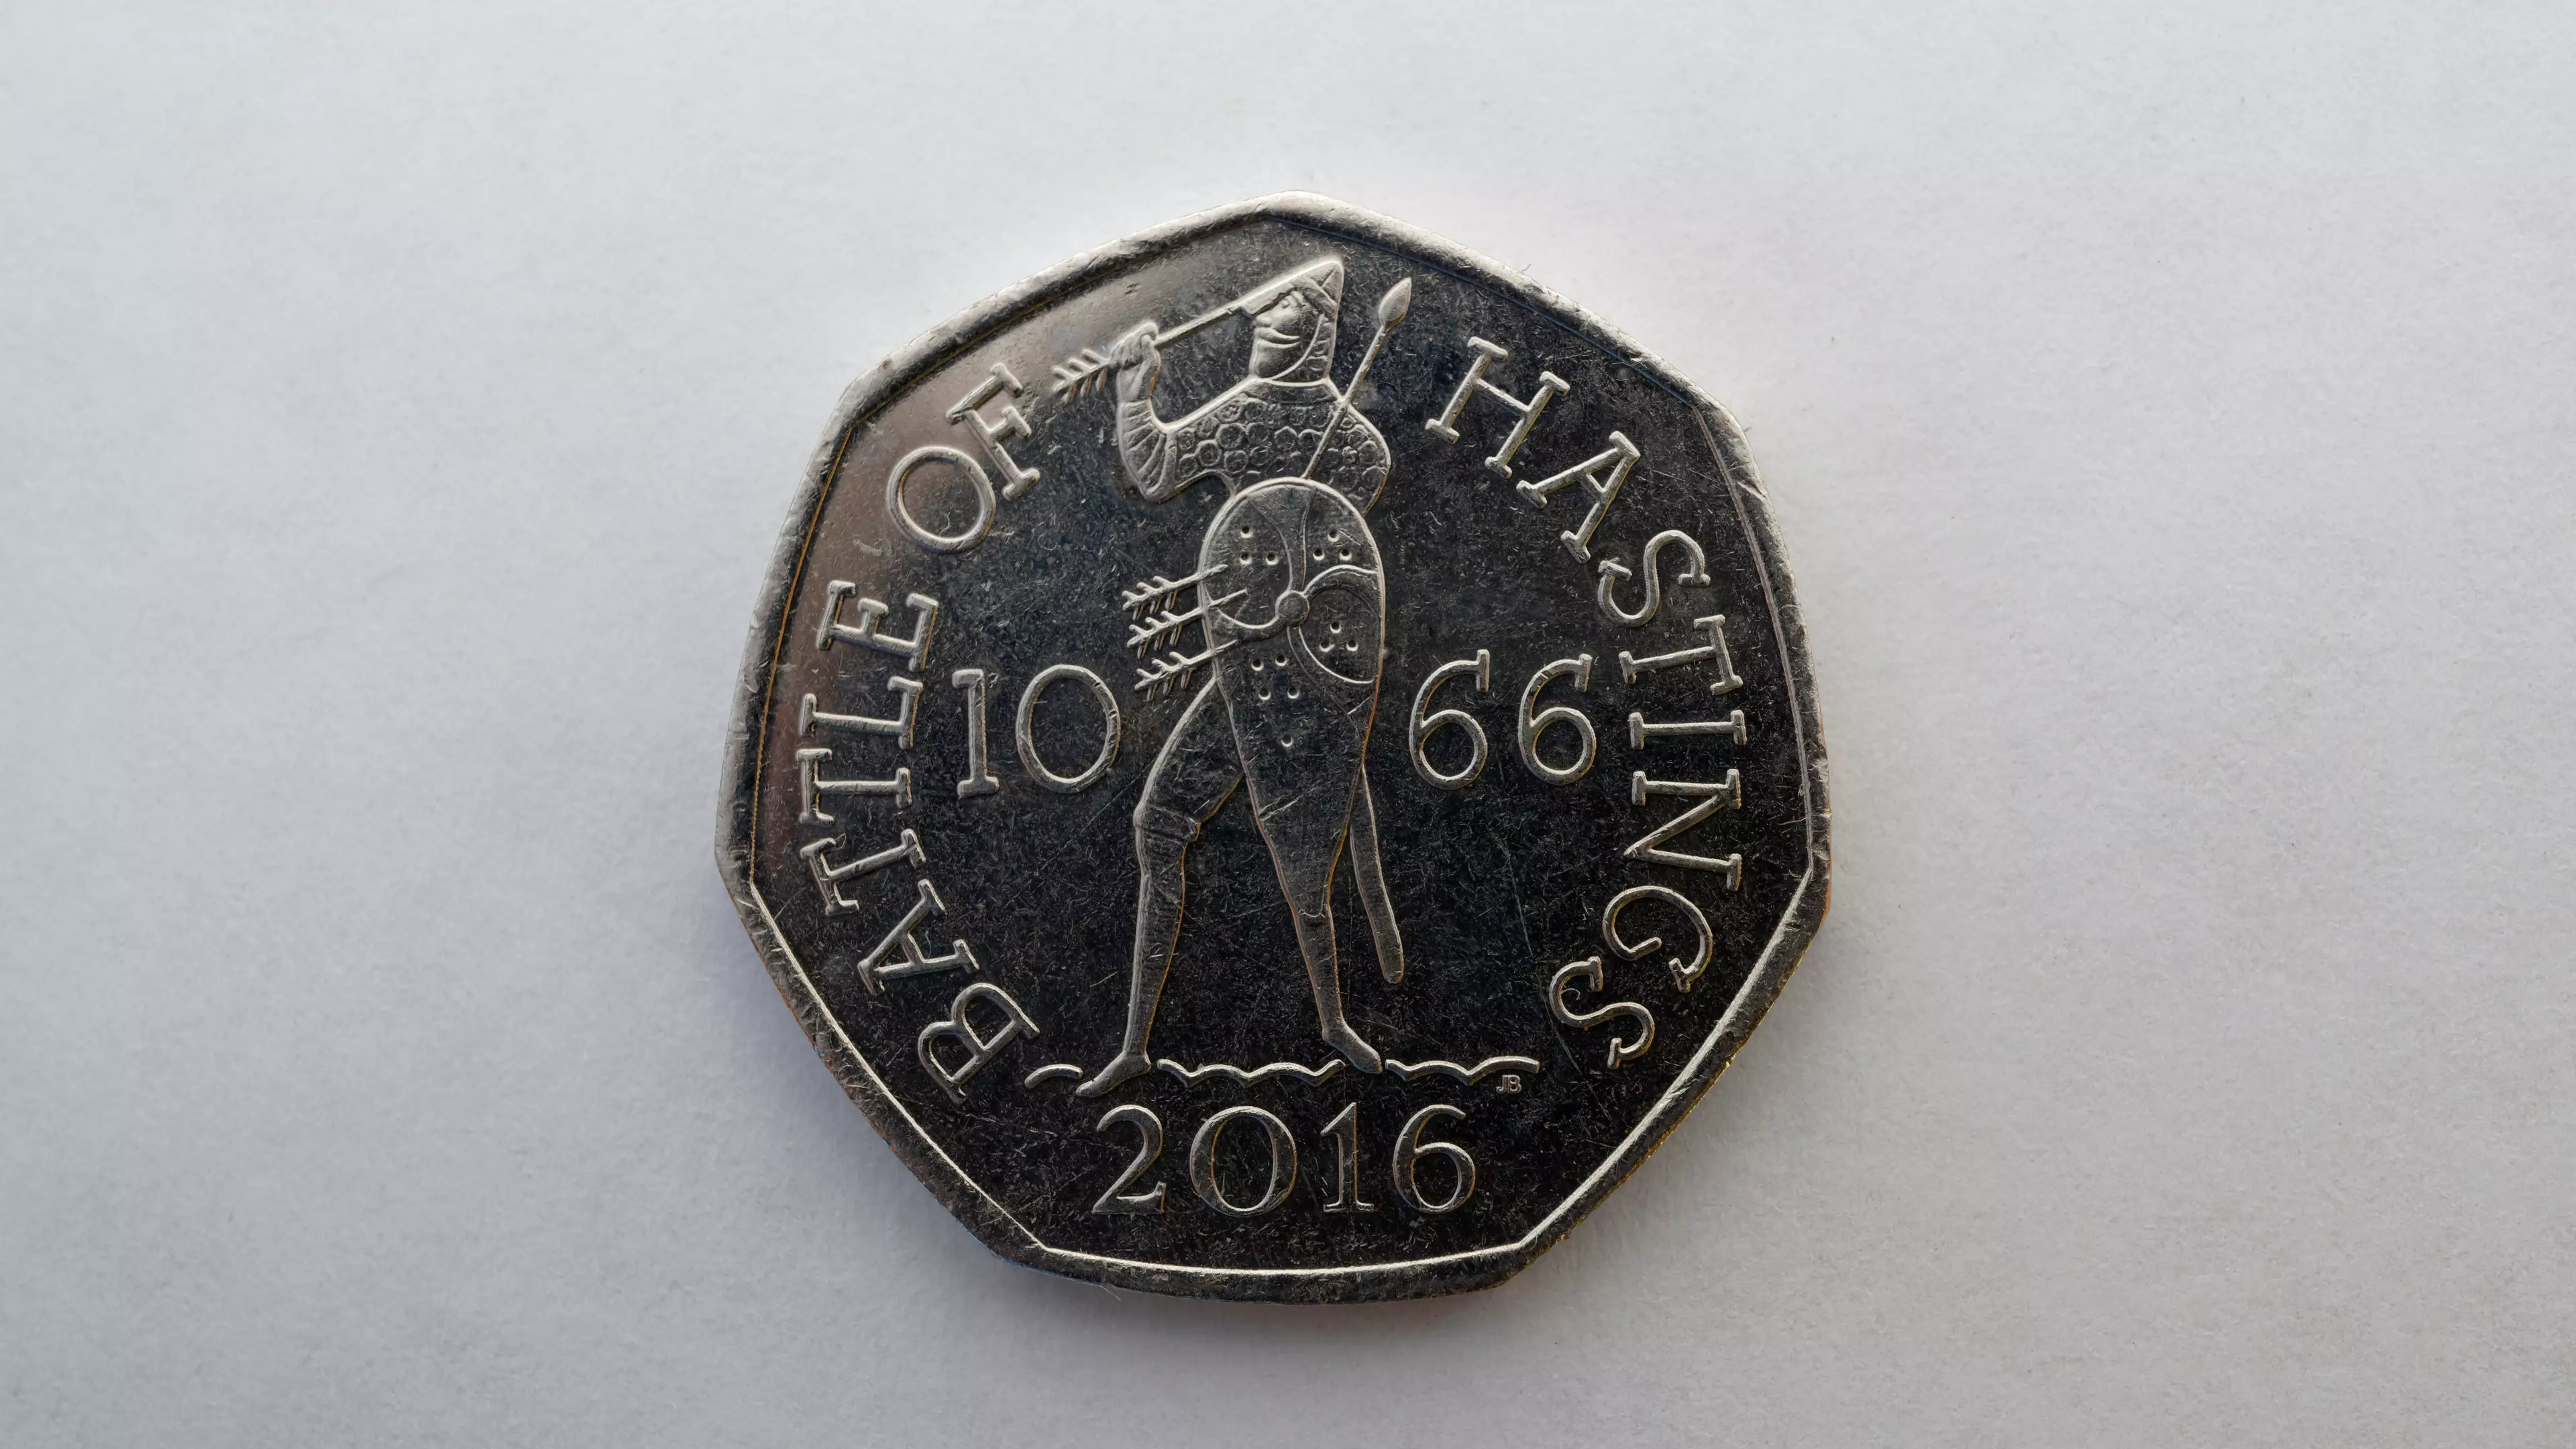 Battle Of Hastings 50p Coin Fetches More Than £63,000 On eBay